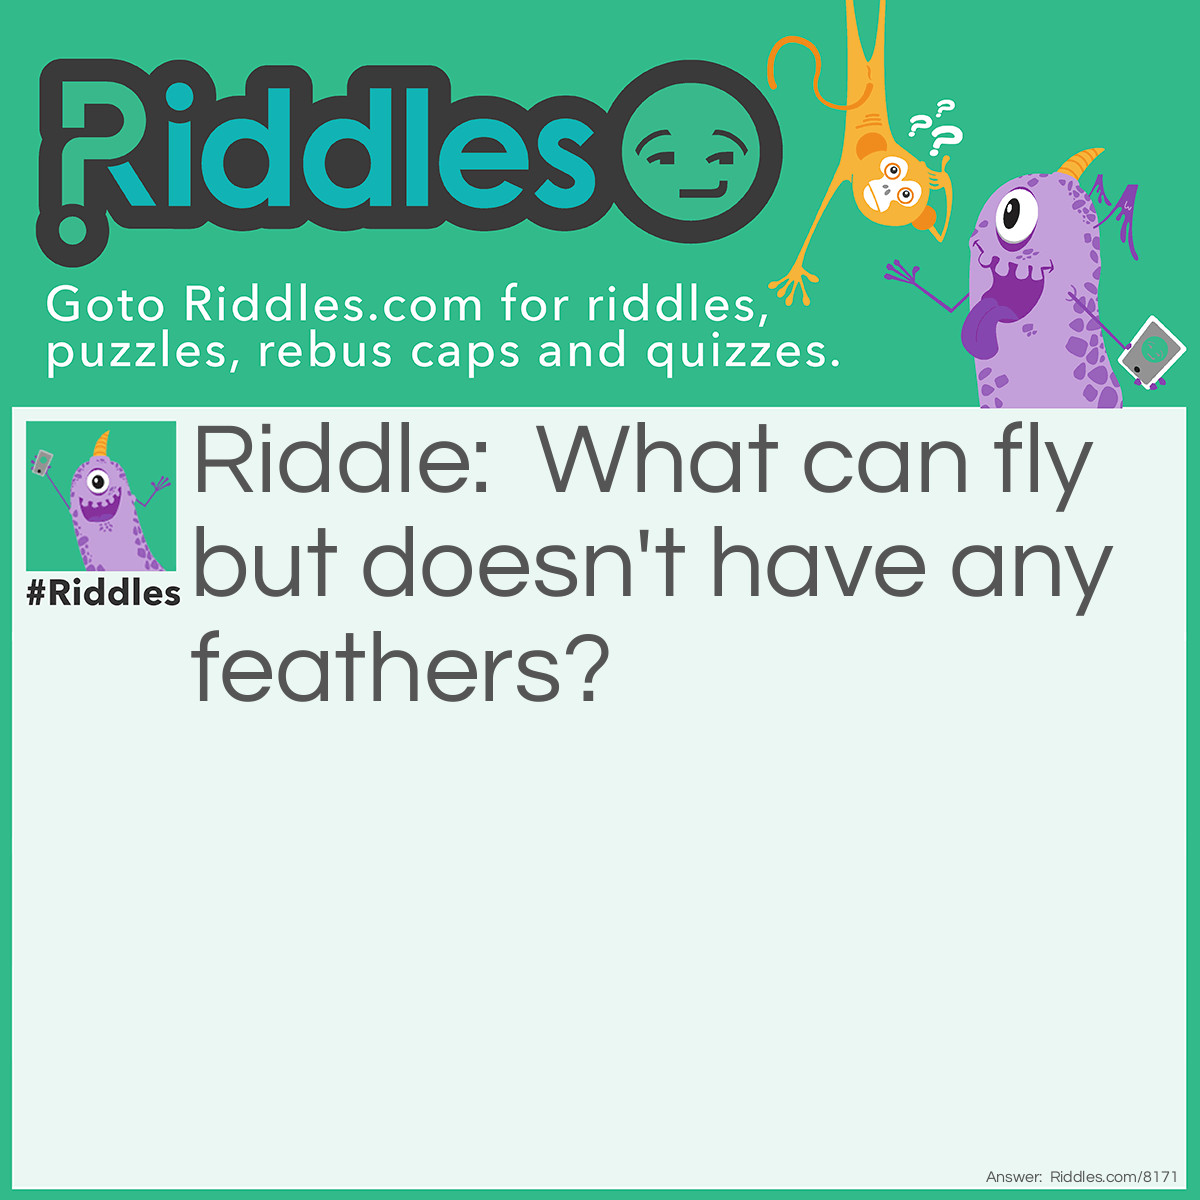 Riddle: What can fly but doesn't have any feathers? Answer: A Bat.